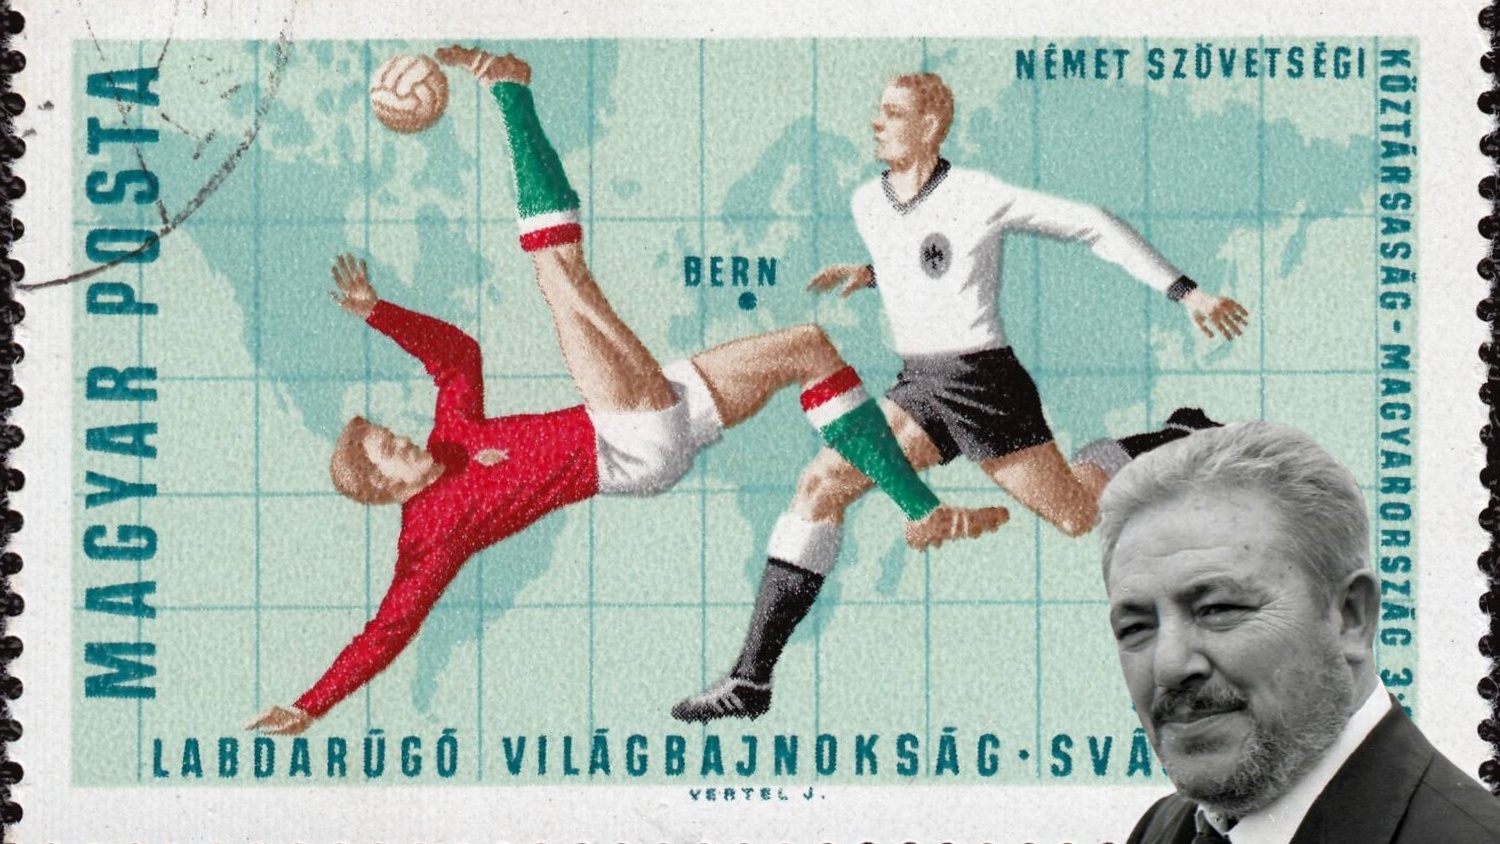 170ft-1954-germany-fifa-world-cup_1189_5418700706e0d11L